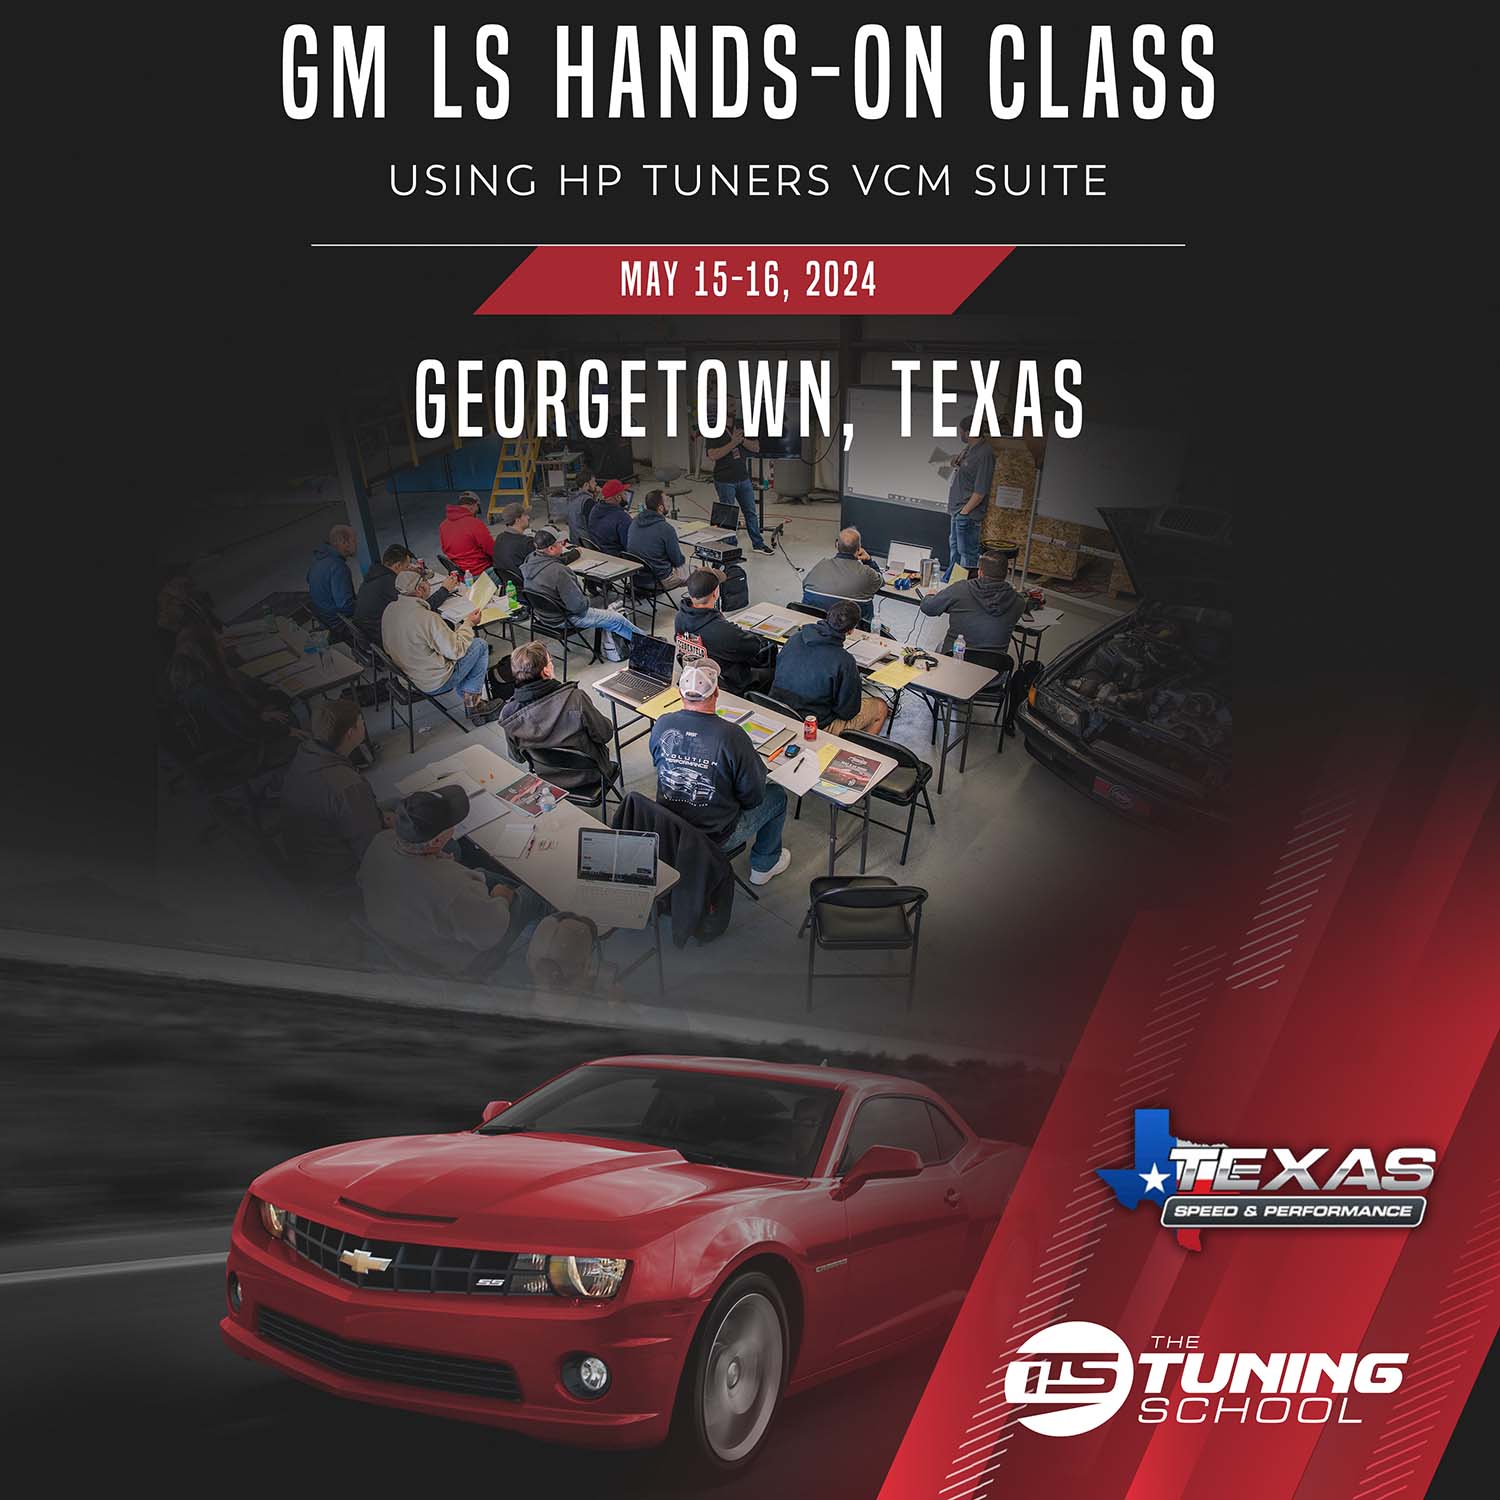 GM LS Engine Hands-On Class using HP Tuners - Georgetown, TX May 15-16, 2024